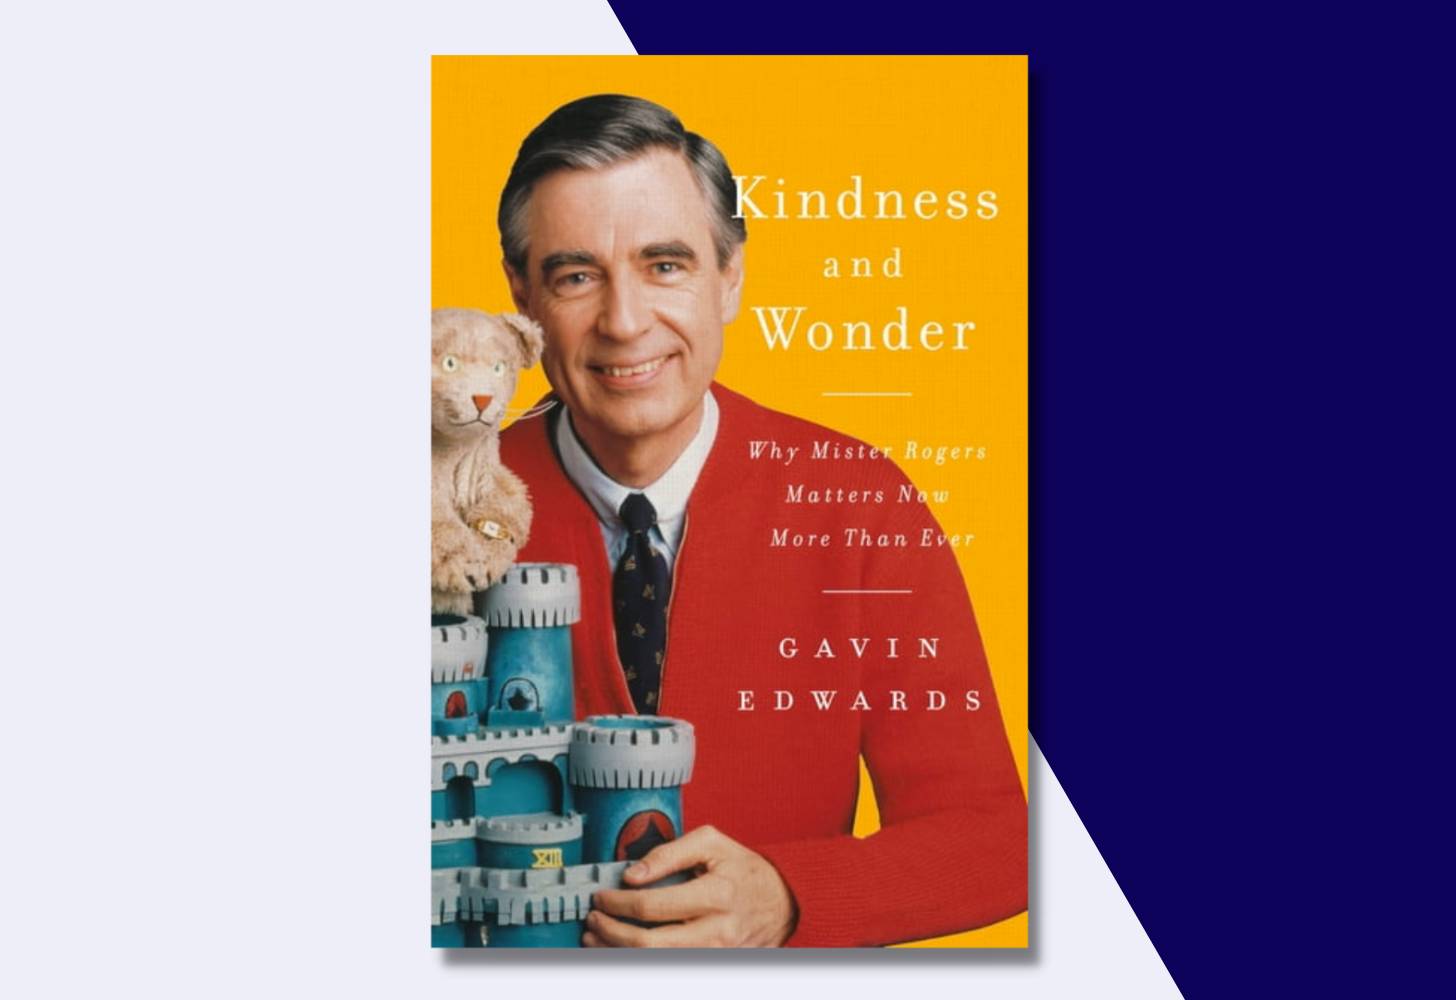 “Kindness and Wonder: Why Mister Rogers Matters Now More Than Ever” by Gavin Edwards